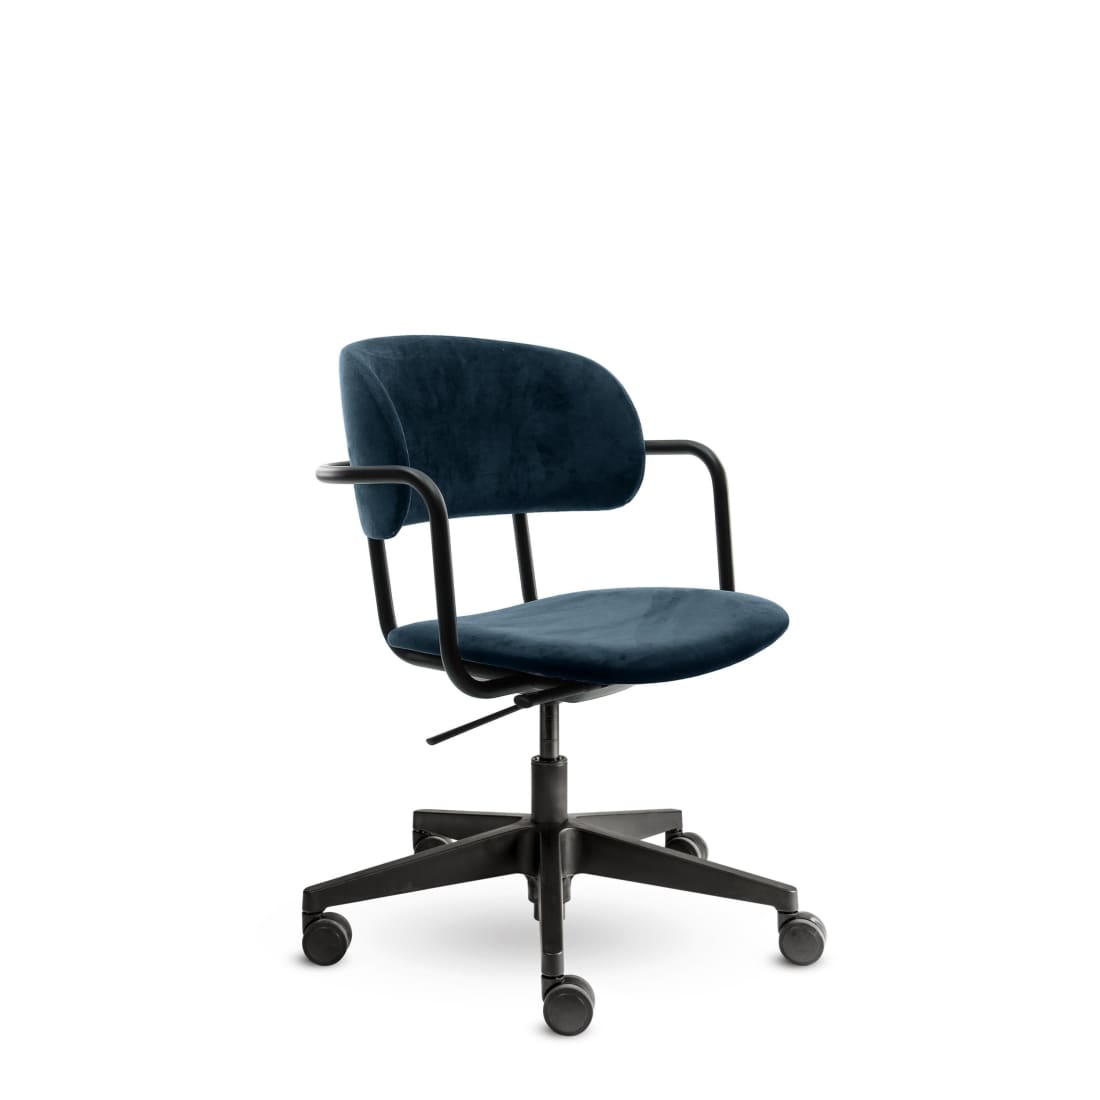 Design Office Chair Navy Blue Pure